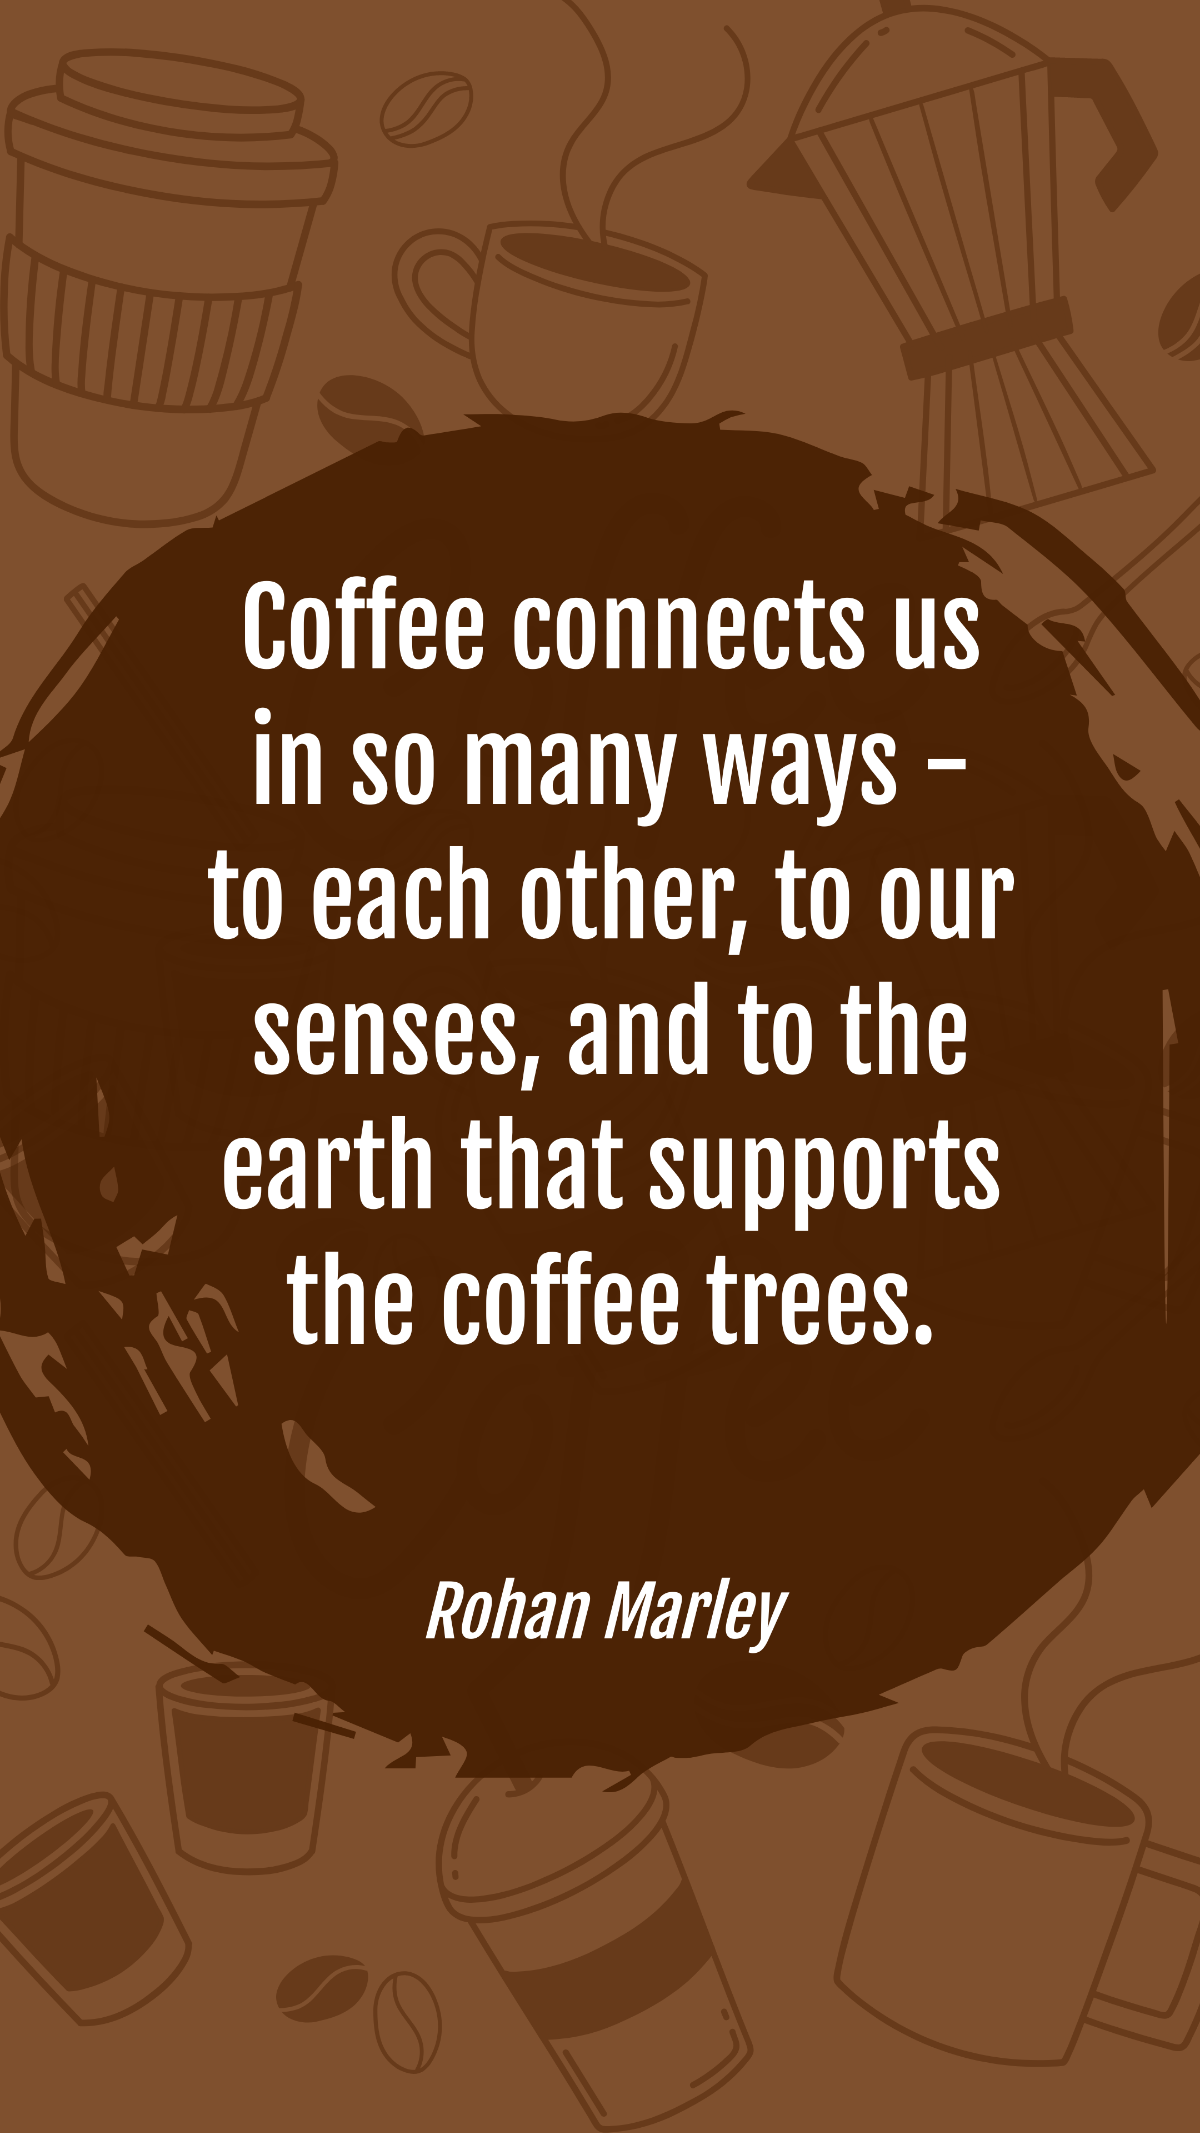 Rohan Marley - Coffee connects us in so many ways - to each other, to our senses, and to the earth that supports the coffee trees. Template